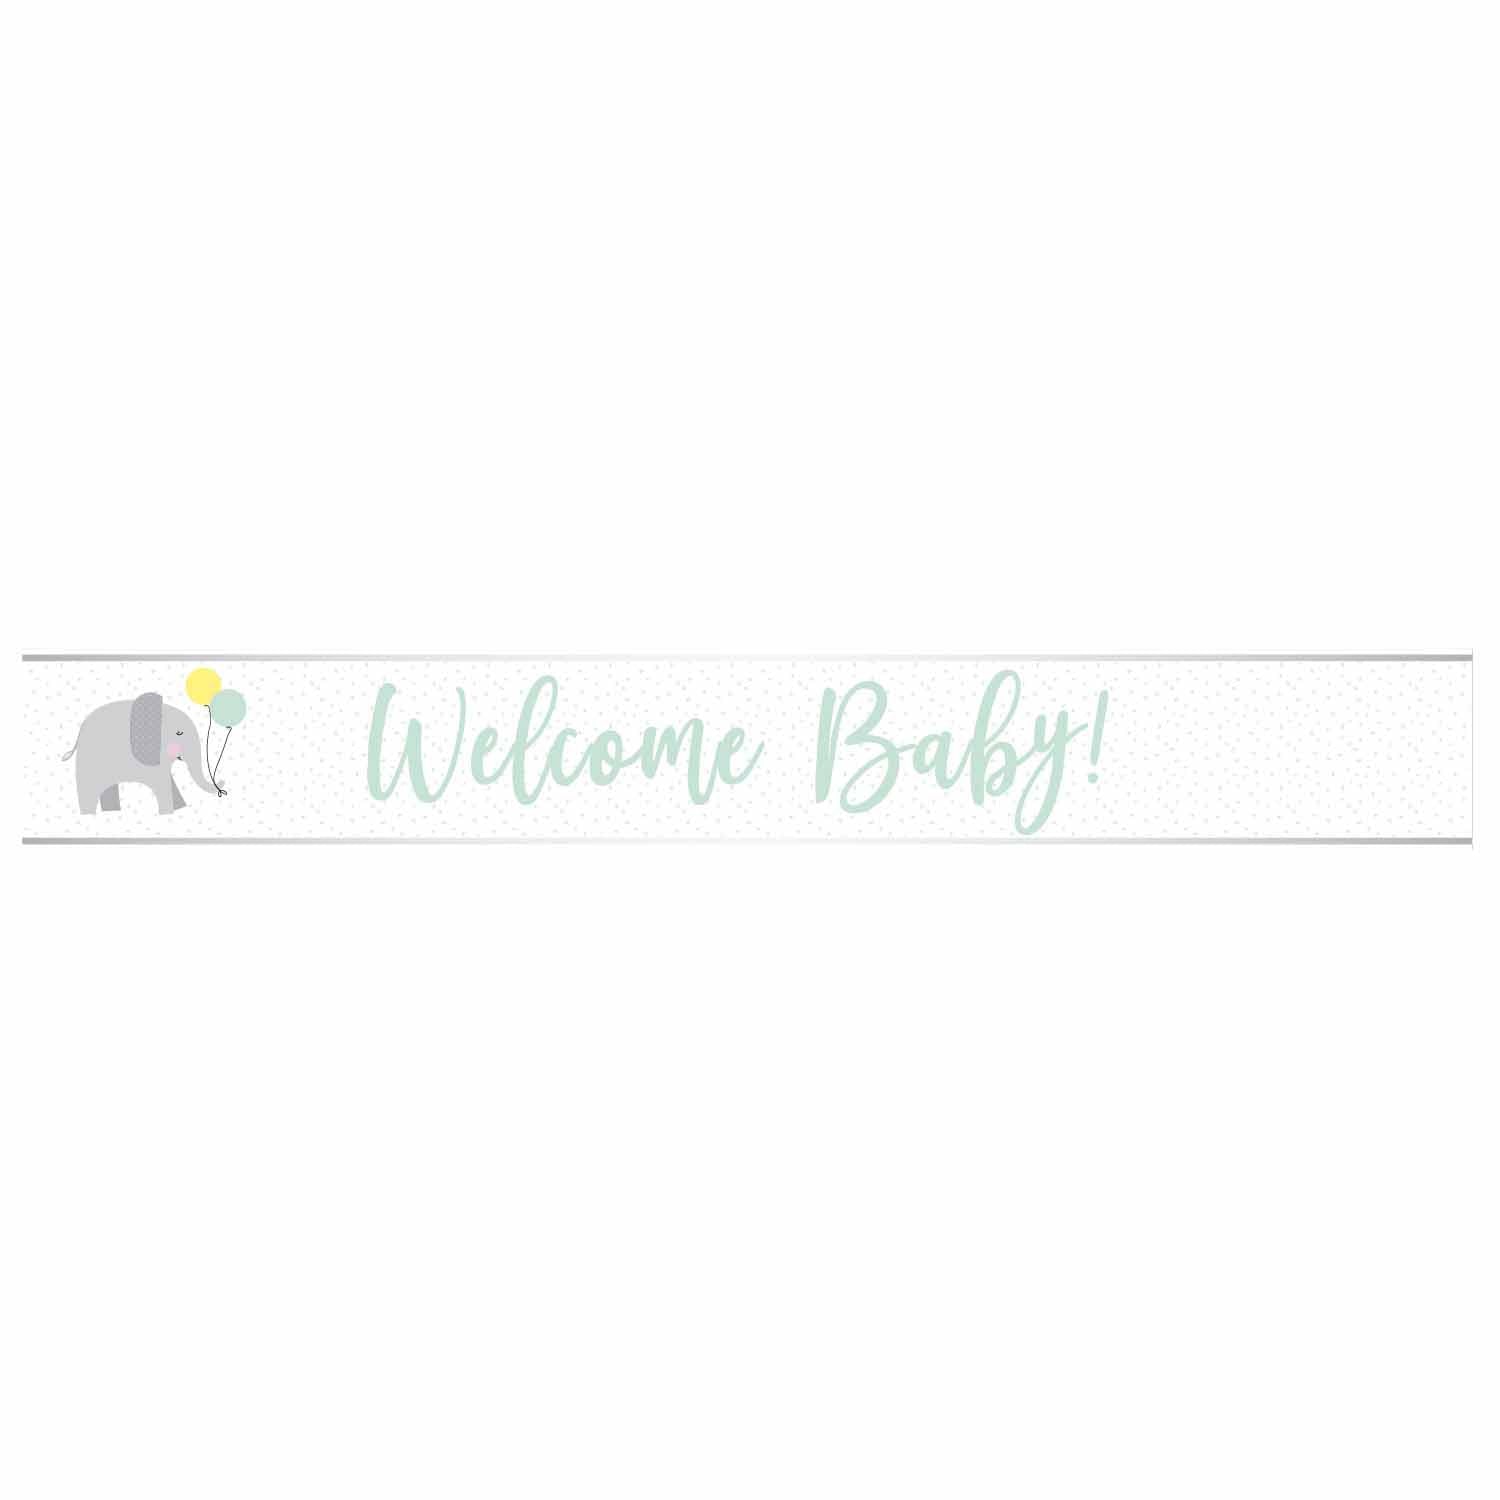 Welcome Baby Blue Script Foil Banners 2.7m